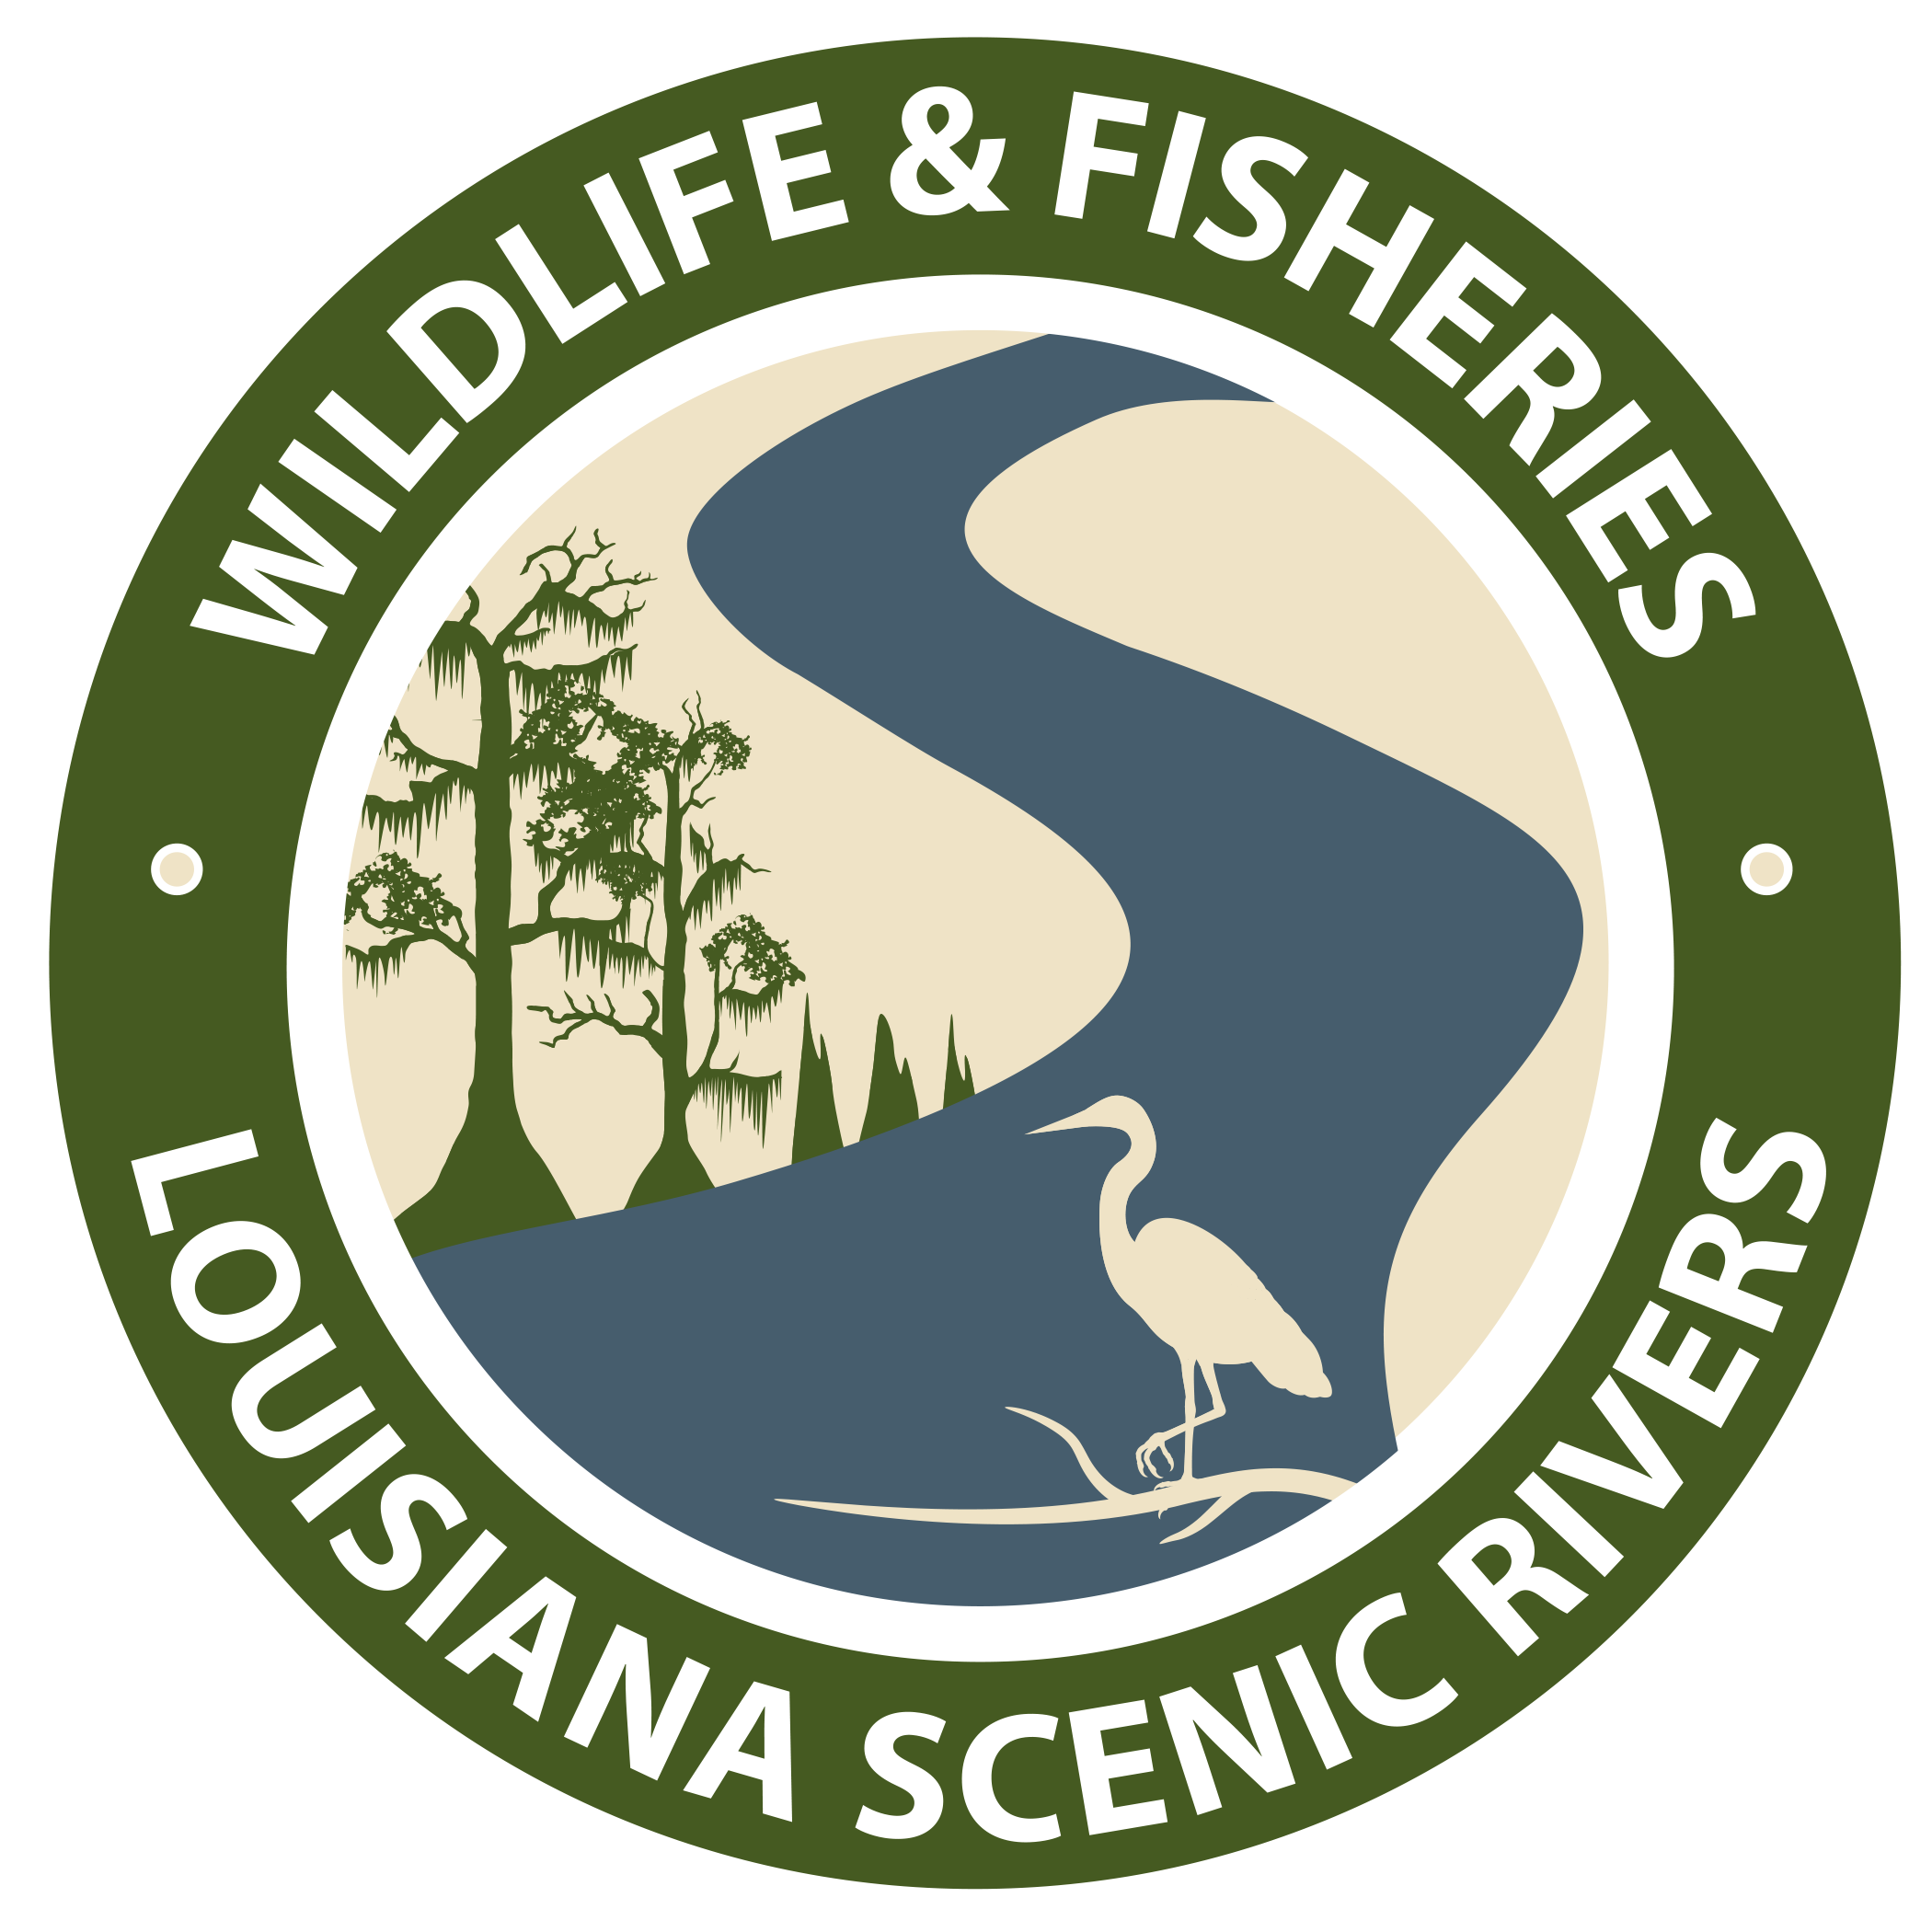 Best Fishing Practices  Louisiana Department of Wildlife and Fisheries